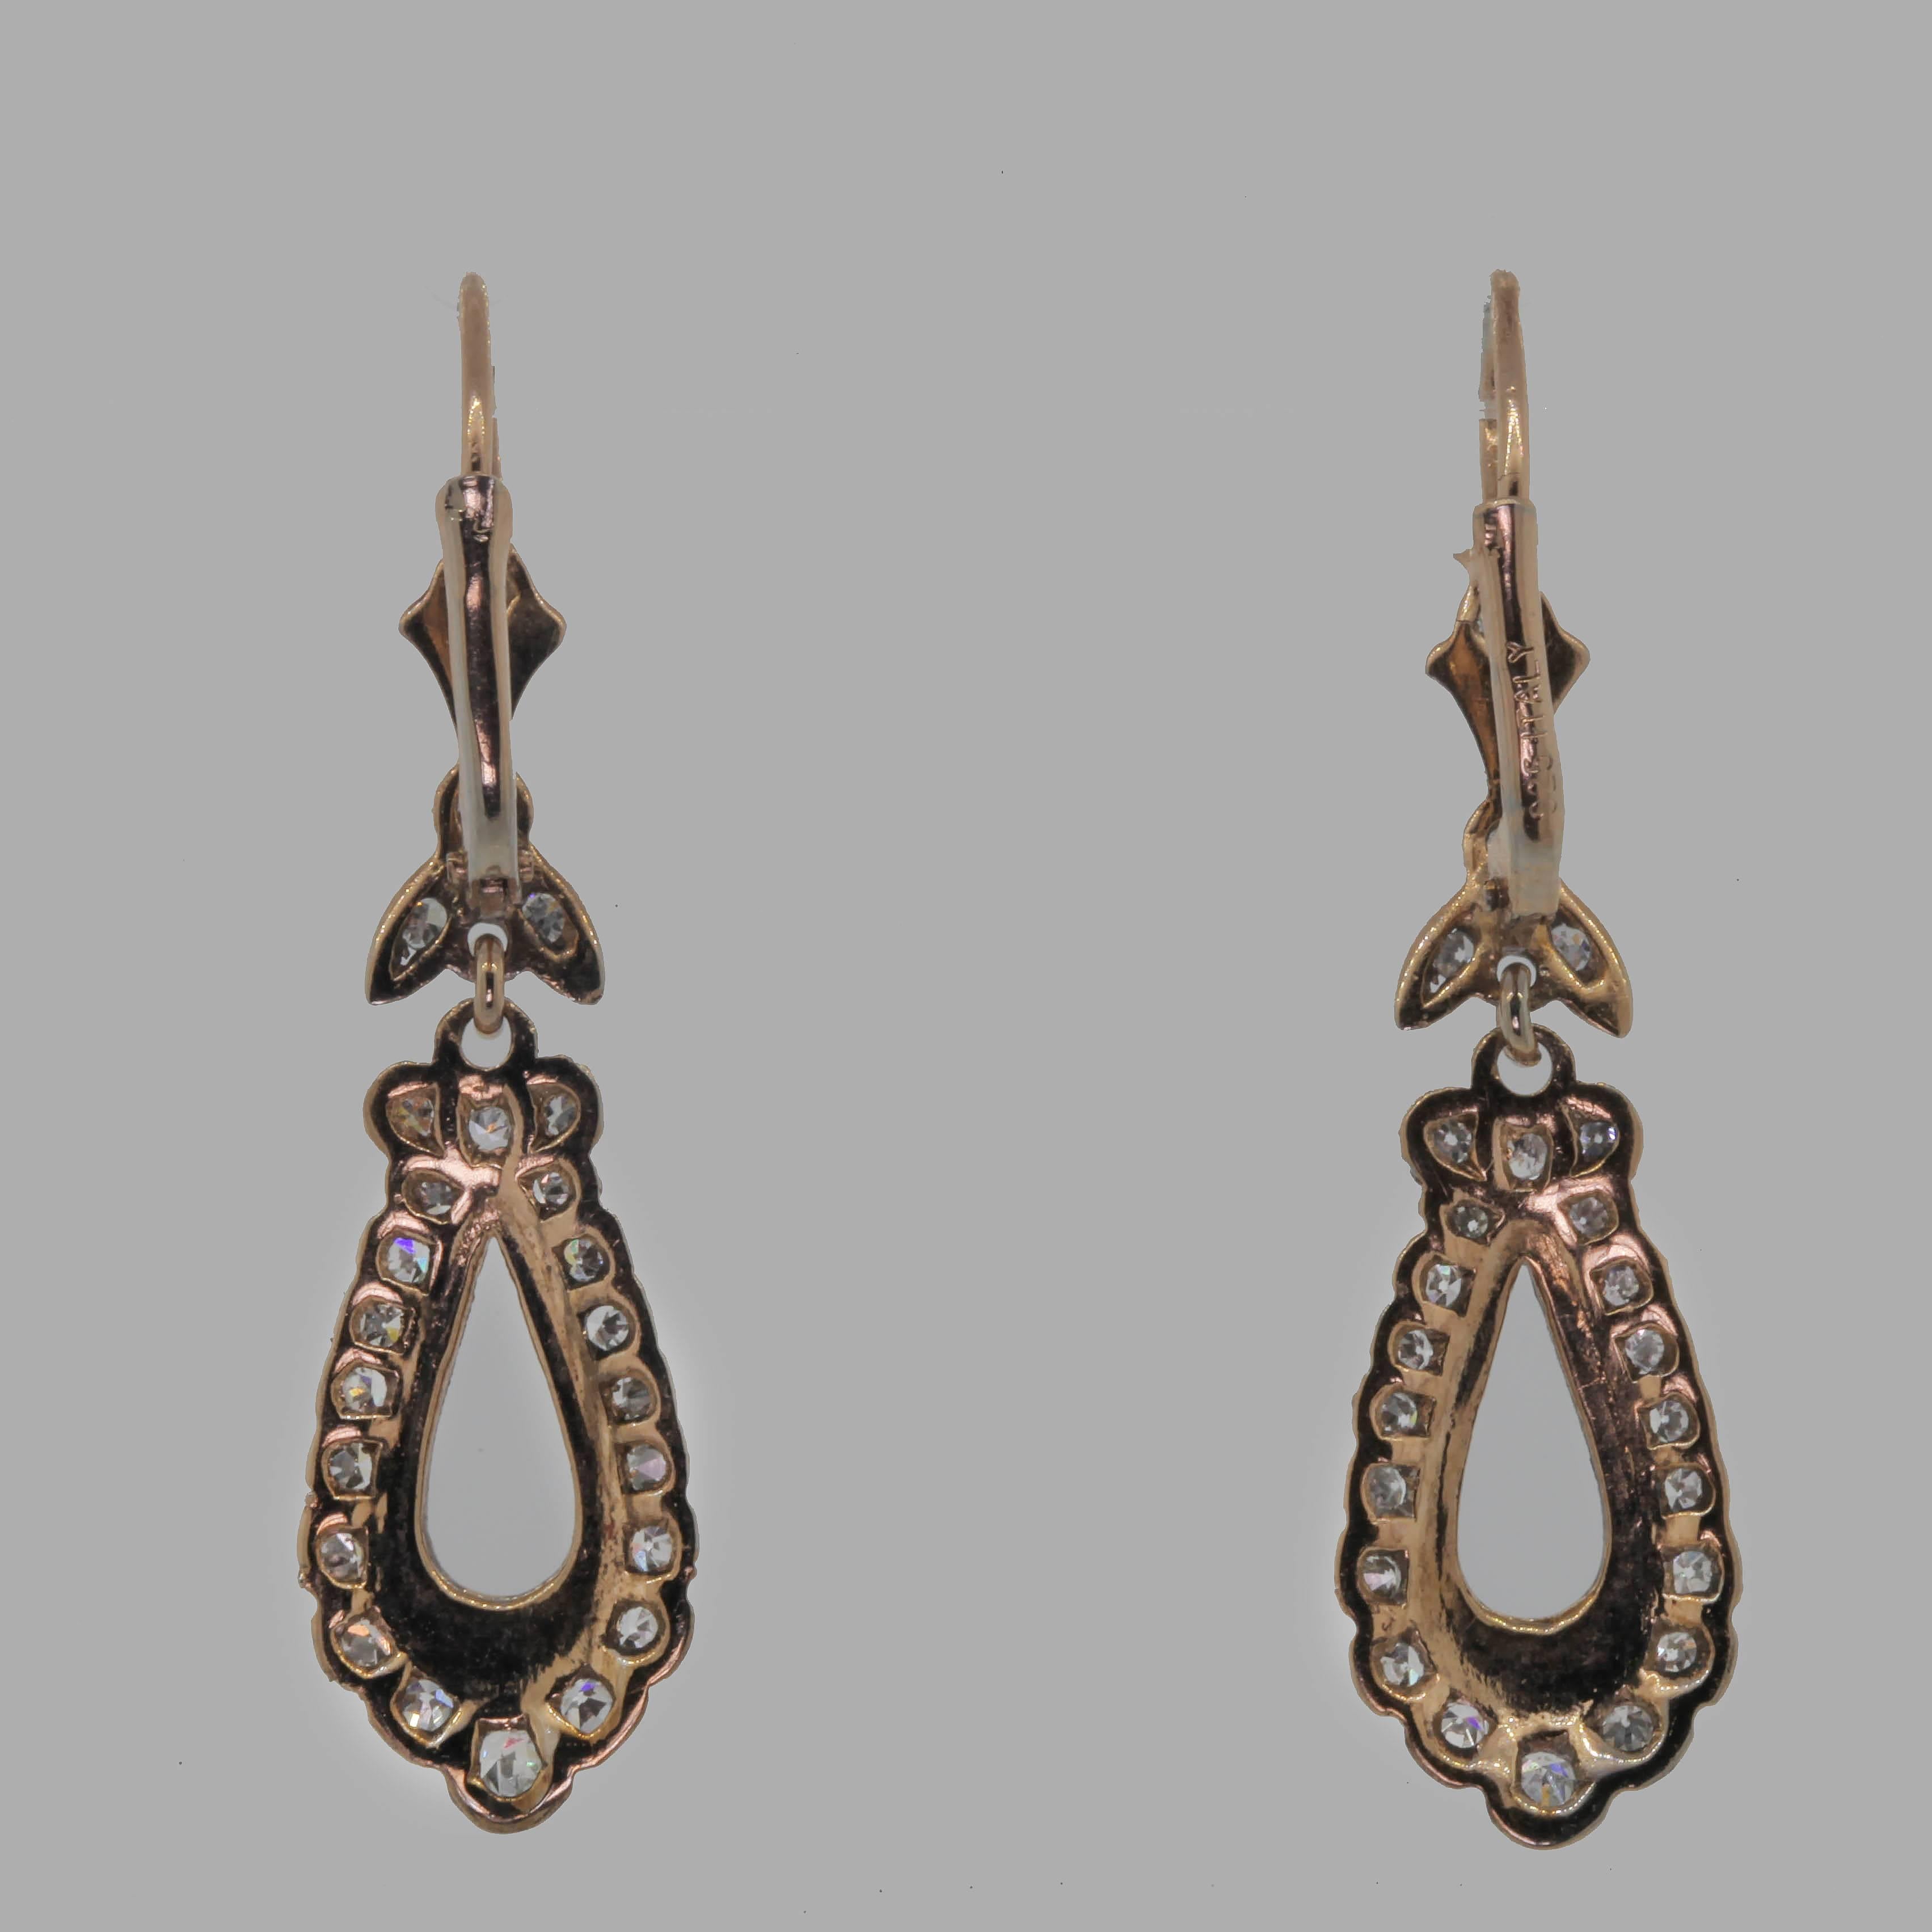 Beautiful dangling platinum 18KT yellow gold earrings.  The pear shape with floral design tops are set with 1. 15 carat of Single Cut Diamonds all of  H/I color - VS/SI and are completed with hooks and lever backs.  Simply Romantic! Circa 1960s.